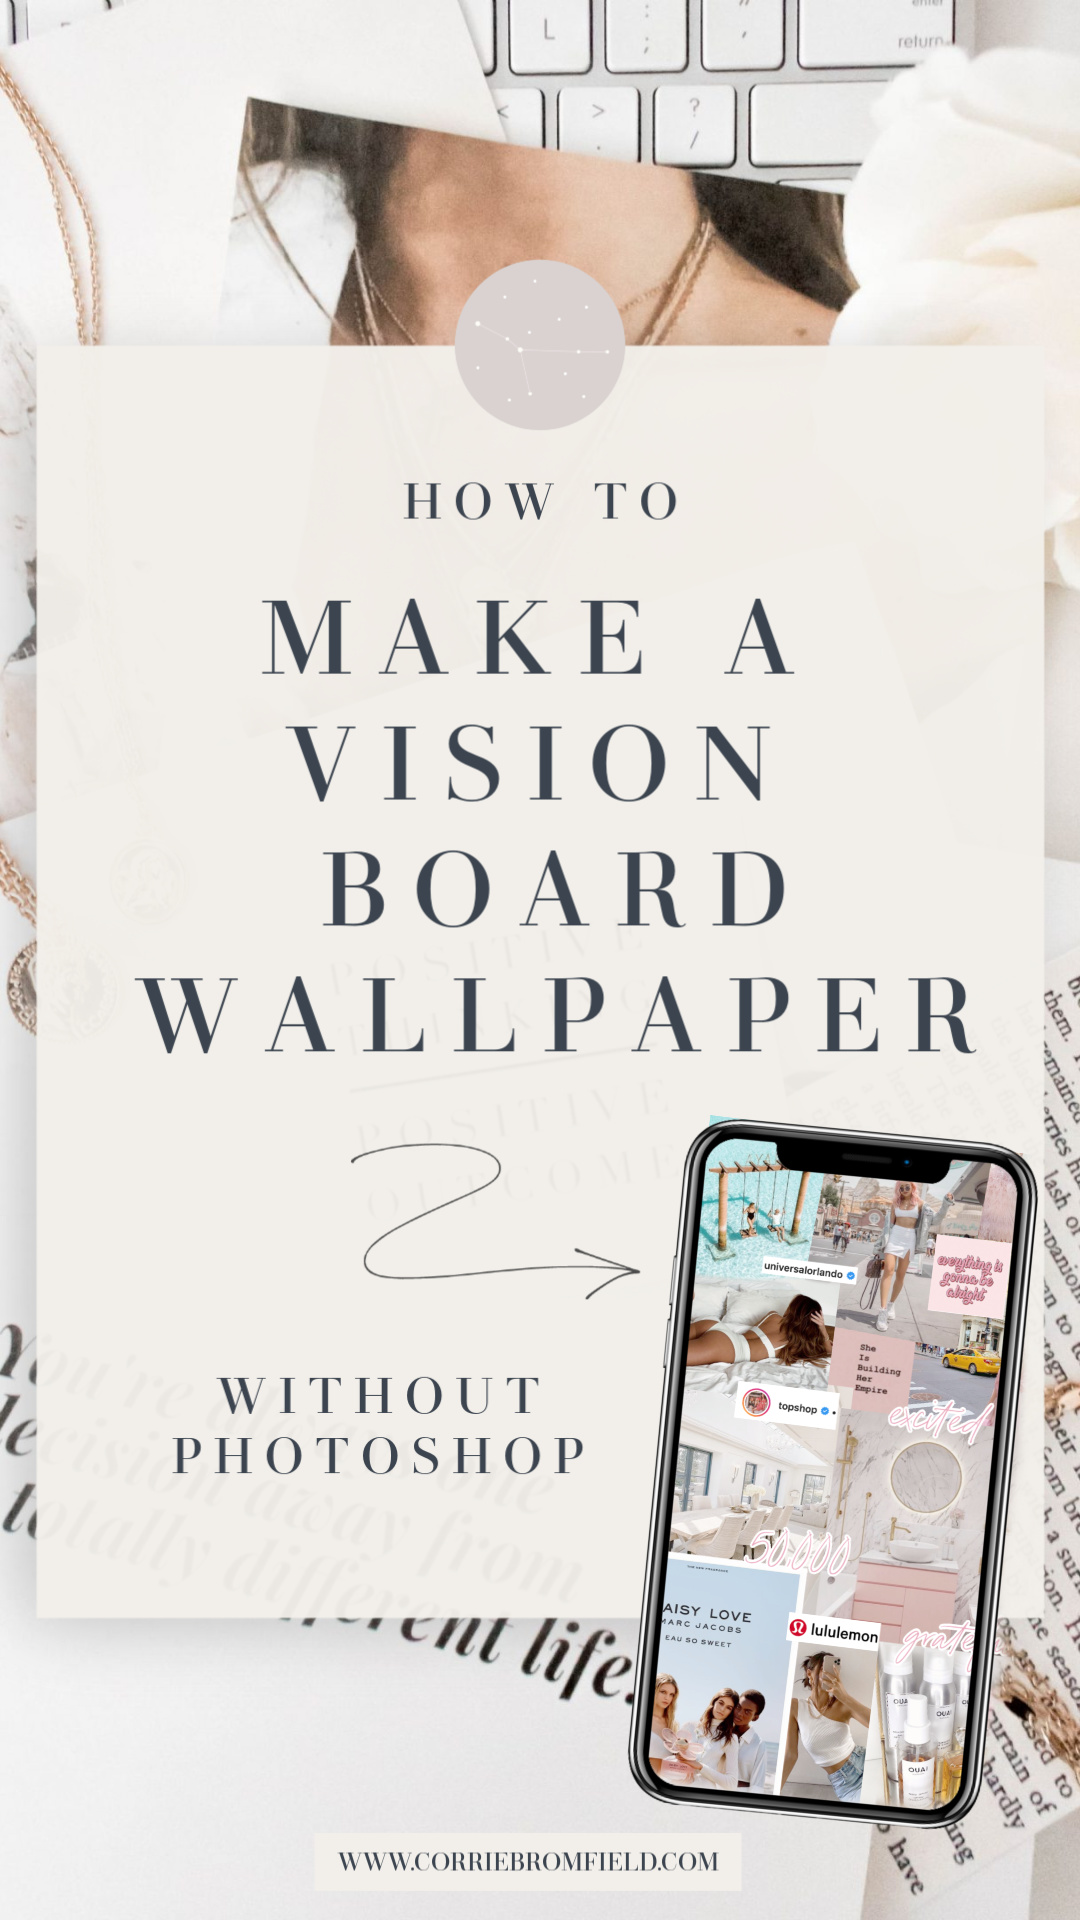 How to make a vision board wallpaper